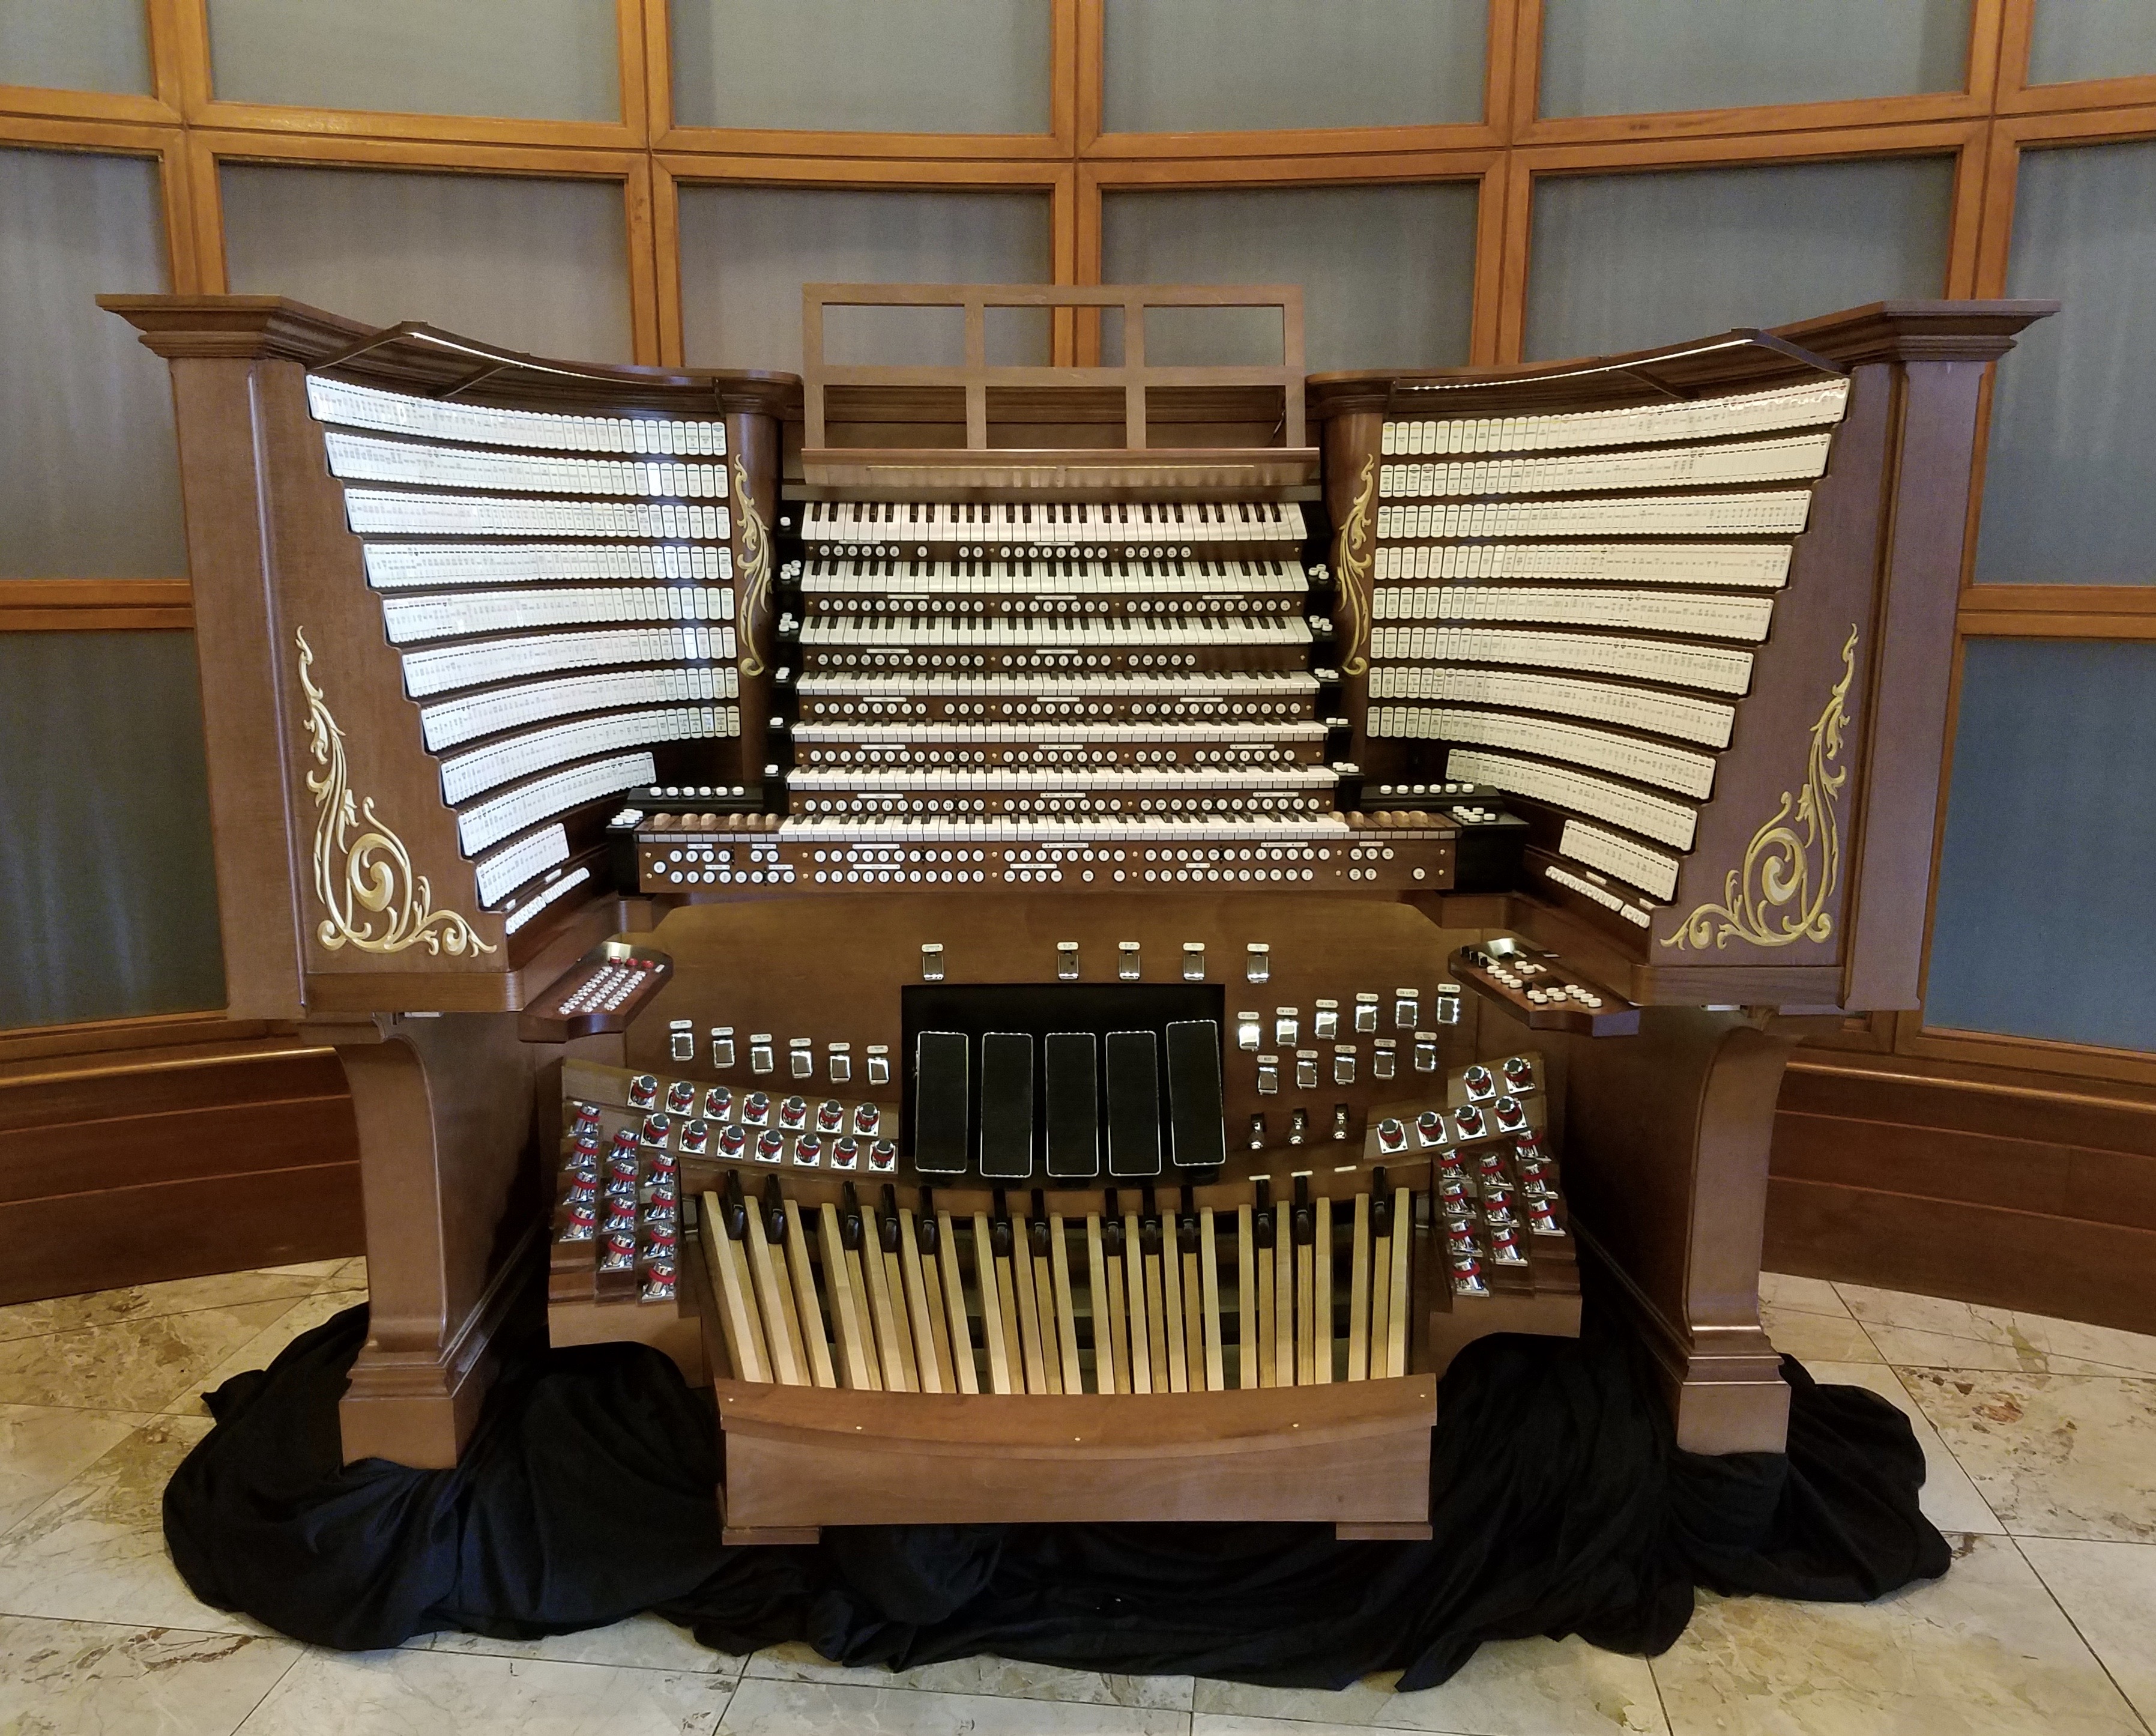 A picture of a large organ stands in a room.